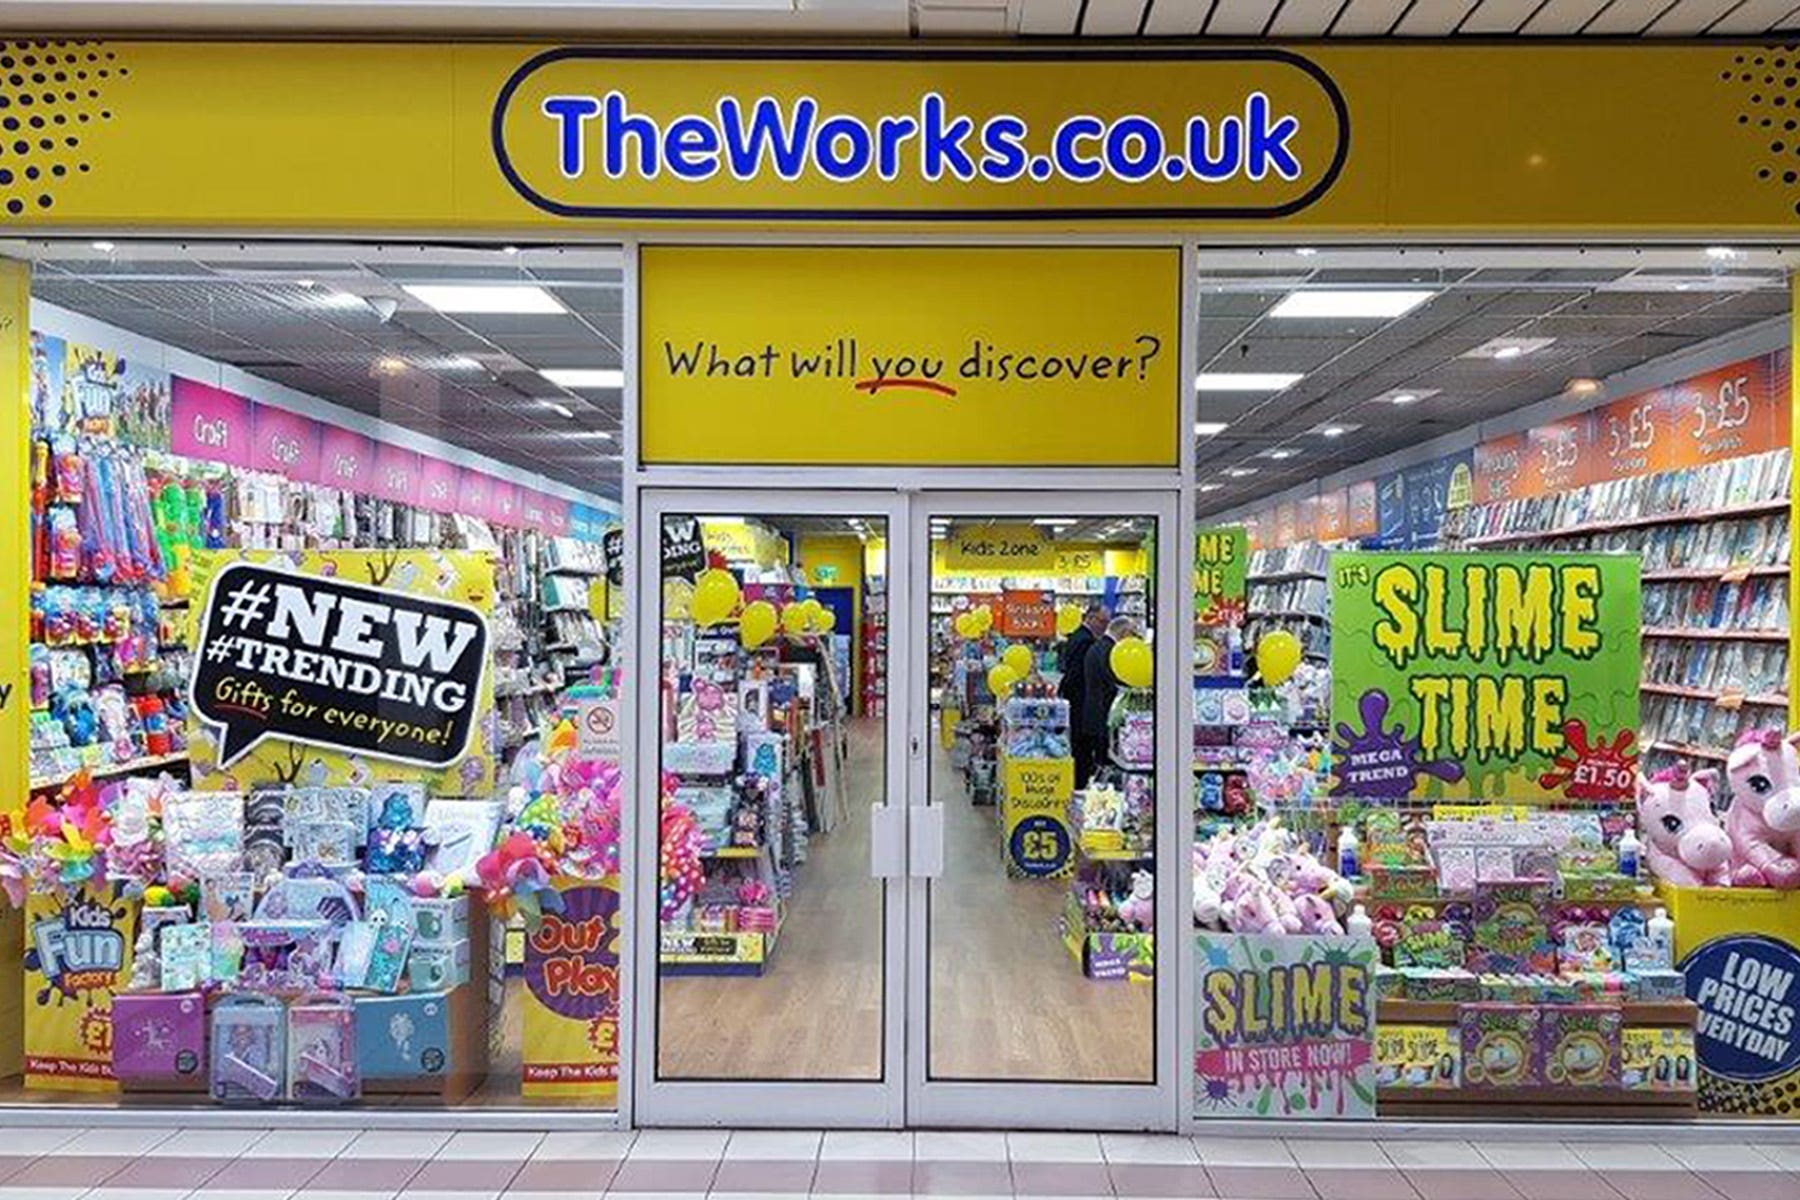 TheWorks.co.uk saw its profit shrink over the latest financial year as it battled inflation (TheWorks.co.uk/PA)